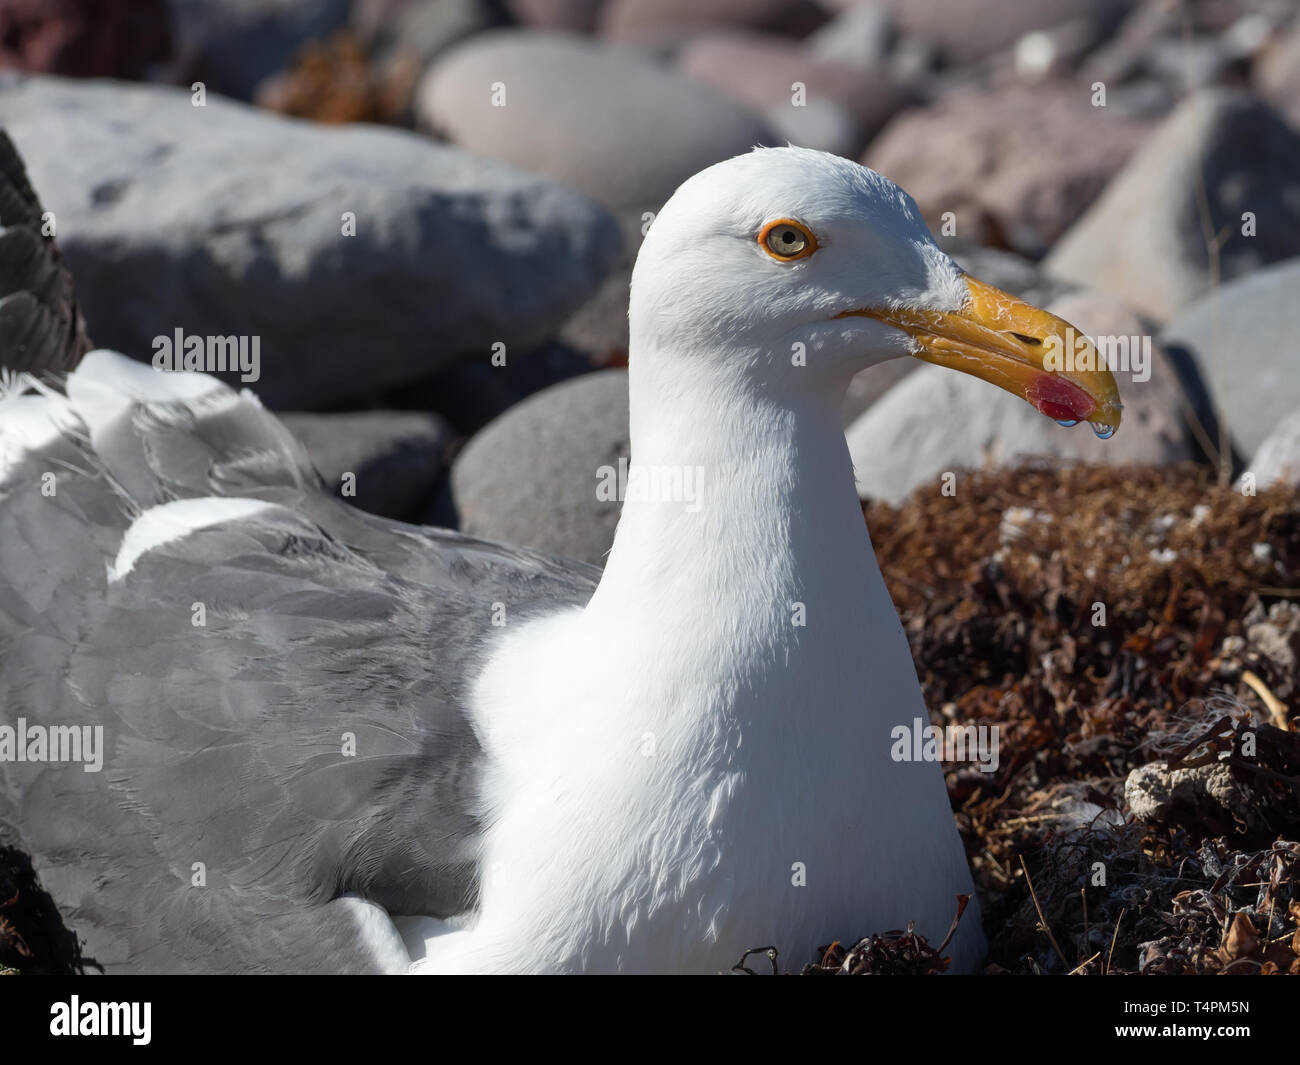 Yellow-footed Gull, Larus livens, endemic to the Sea of Cortez, nesting on an island in Baja California, Mexico Stock Photo